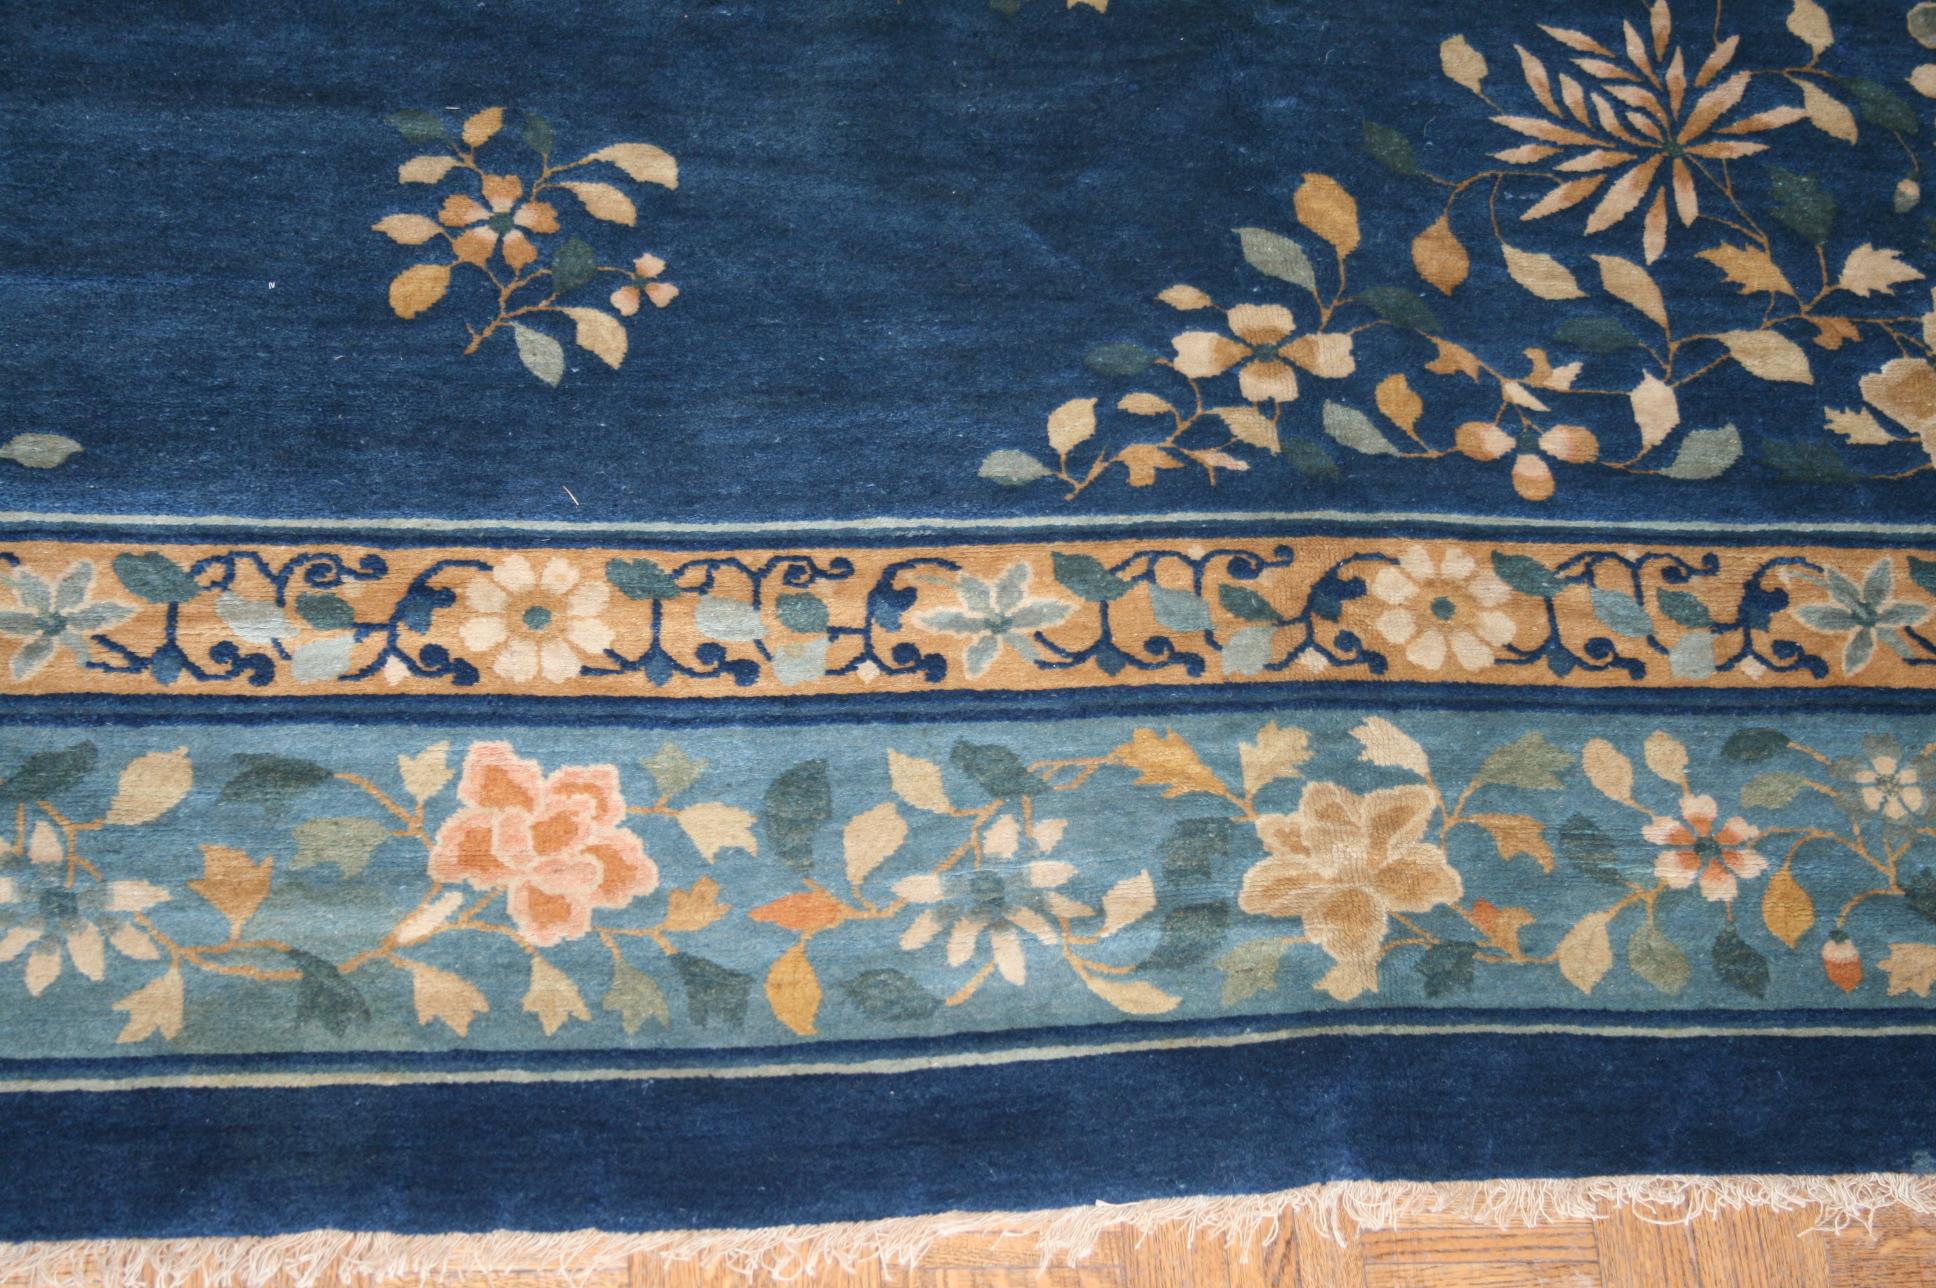 This room size antique was woven in China toward the end of the 19th century. It features a traditionally Chinese design with a central medallion containing a floral motif on a navy field. Outside of the medallion the field is sparsely populated by